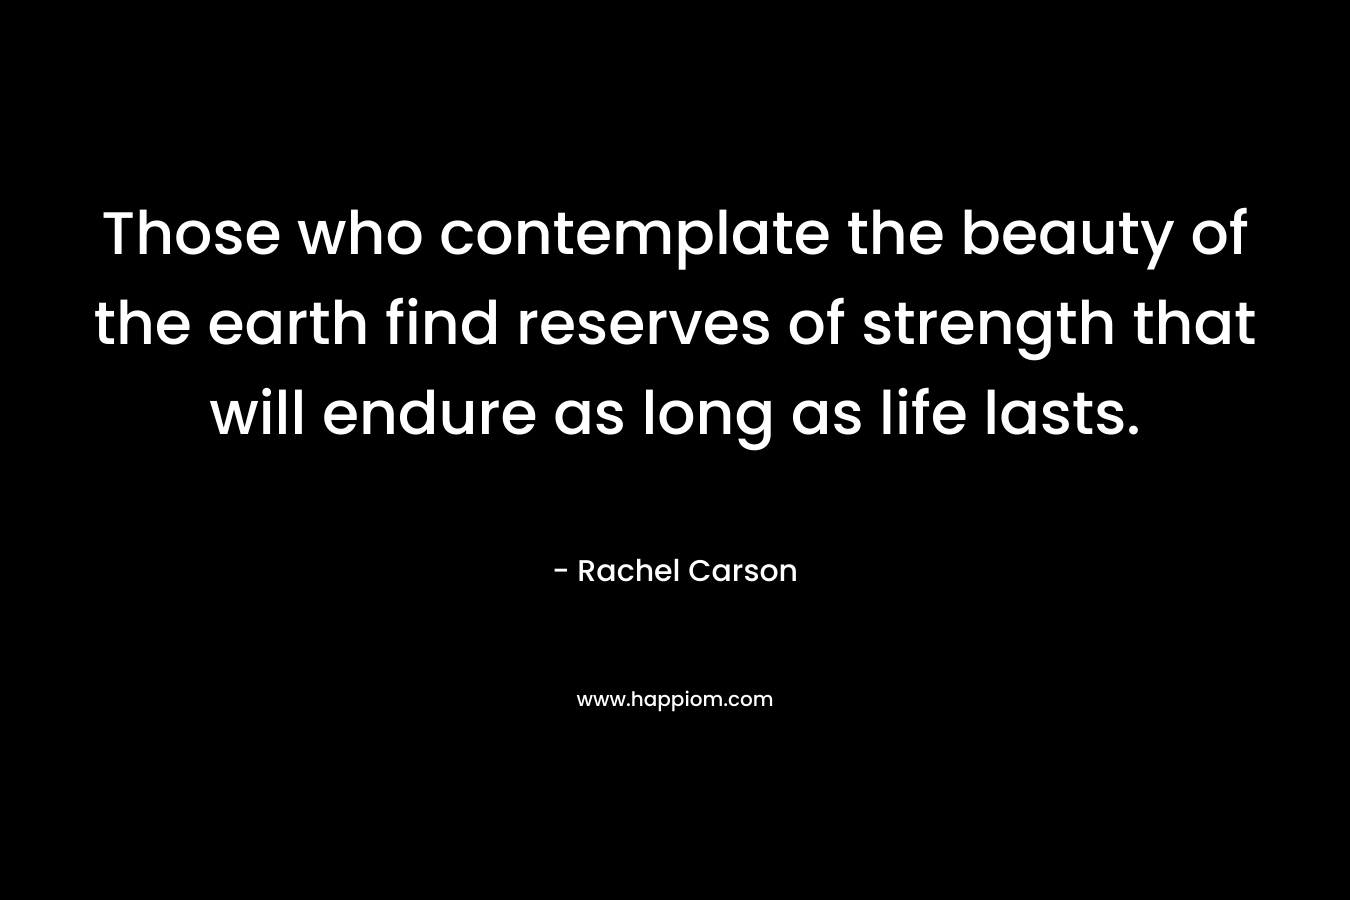 Those who contemplate the beauty of the earth find reserves of strength that will endure as long as life lasts. – Rachel Carson